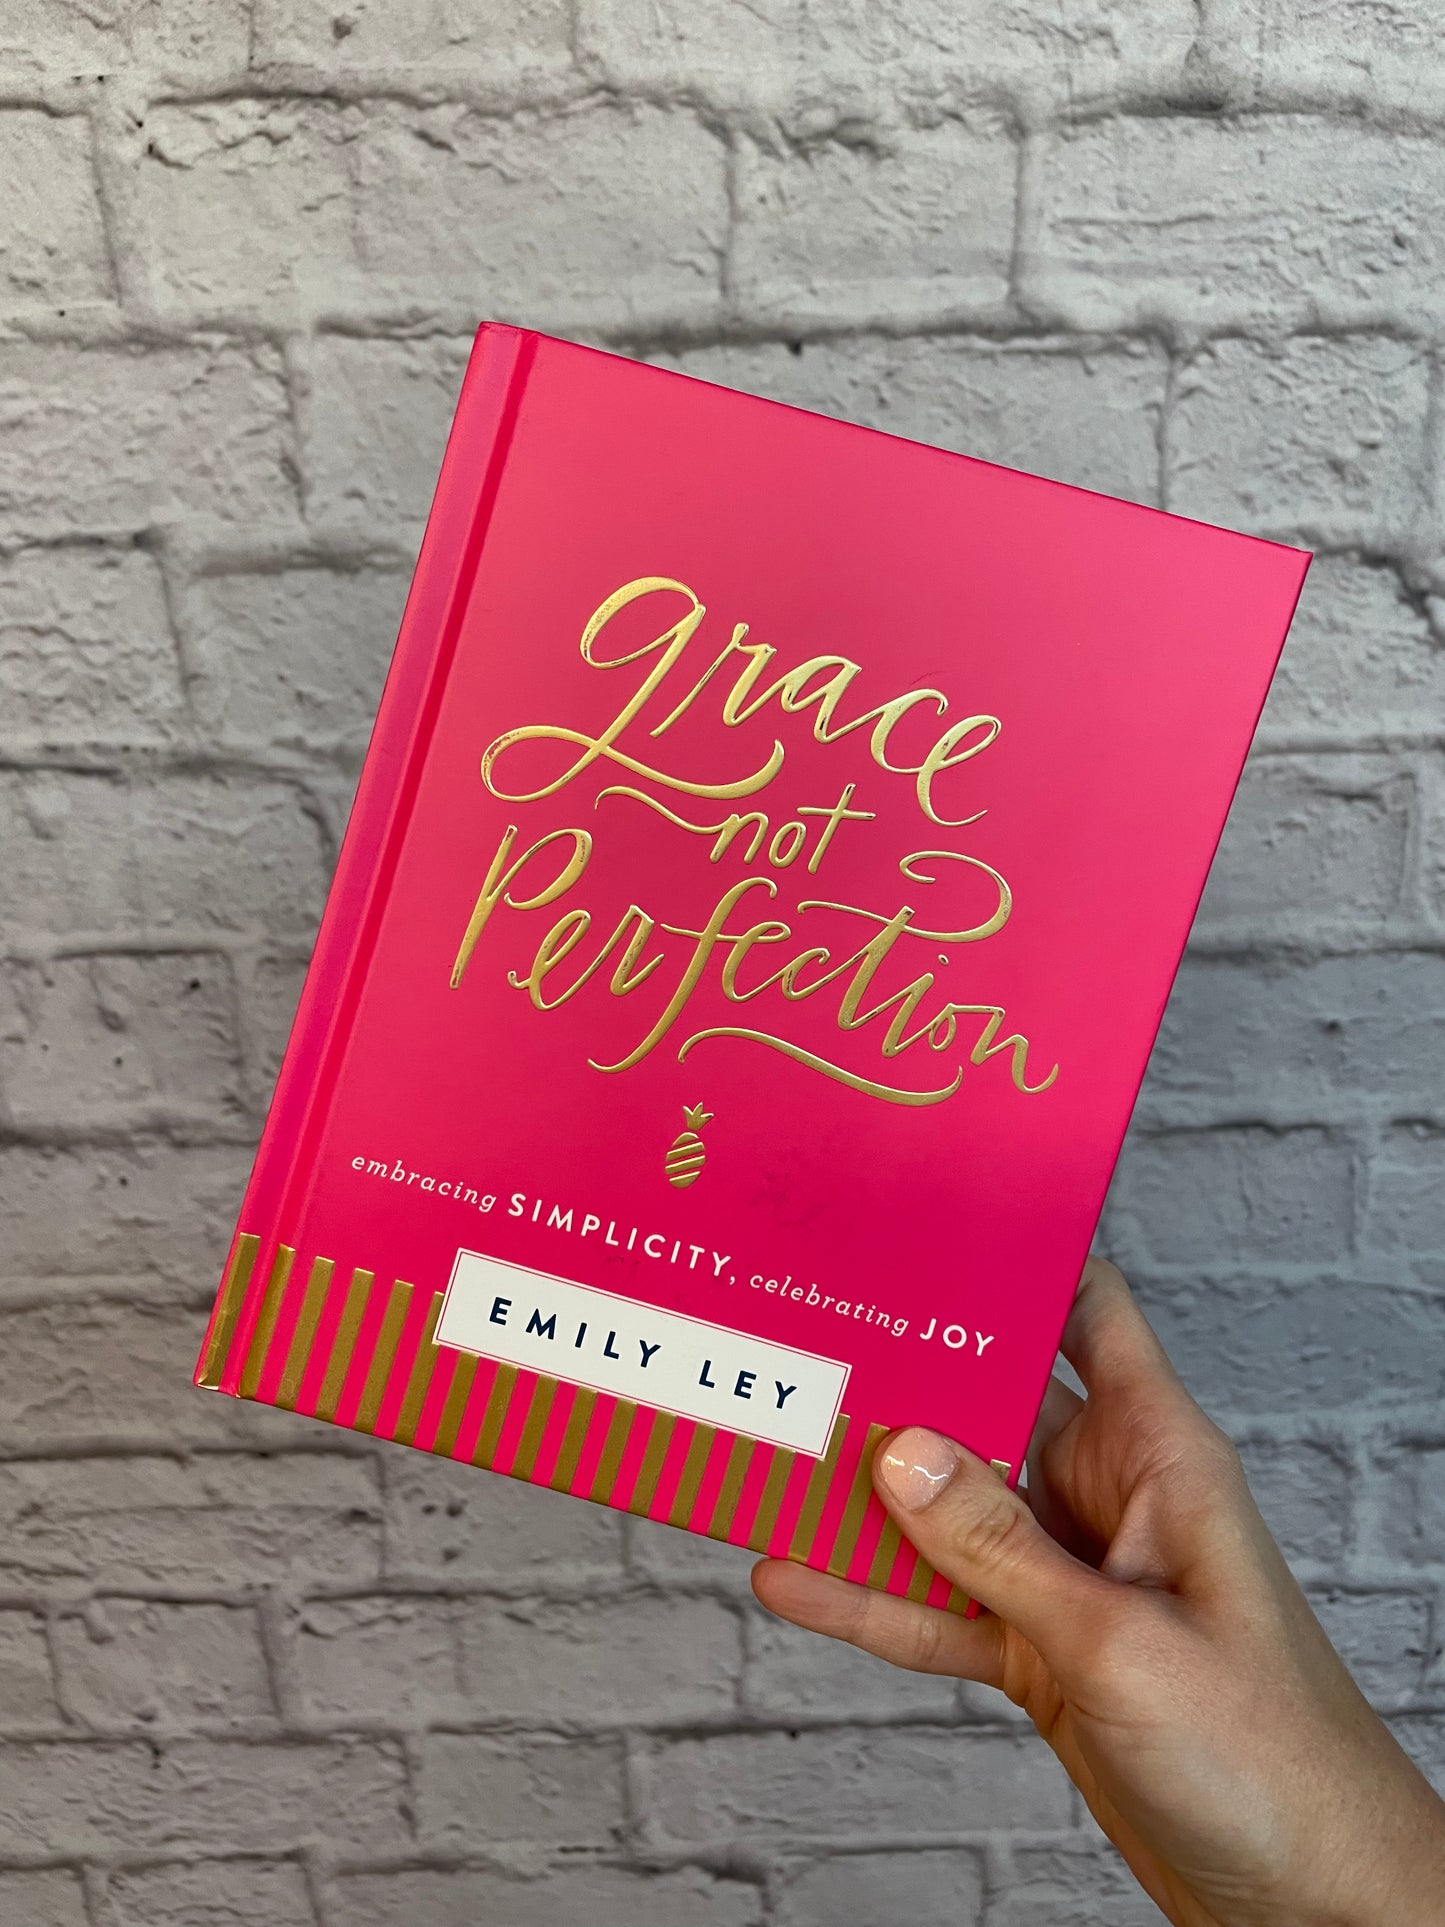 Grace not Perfection